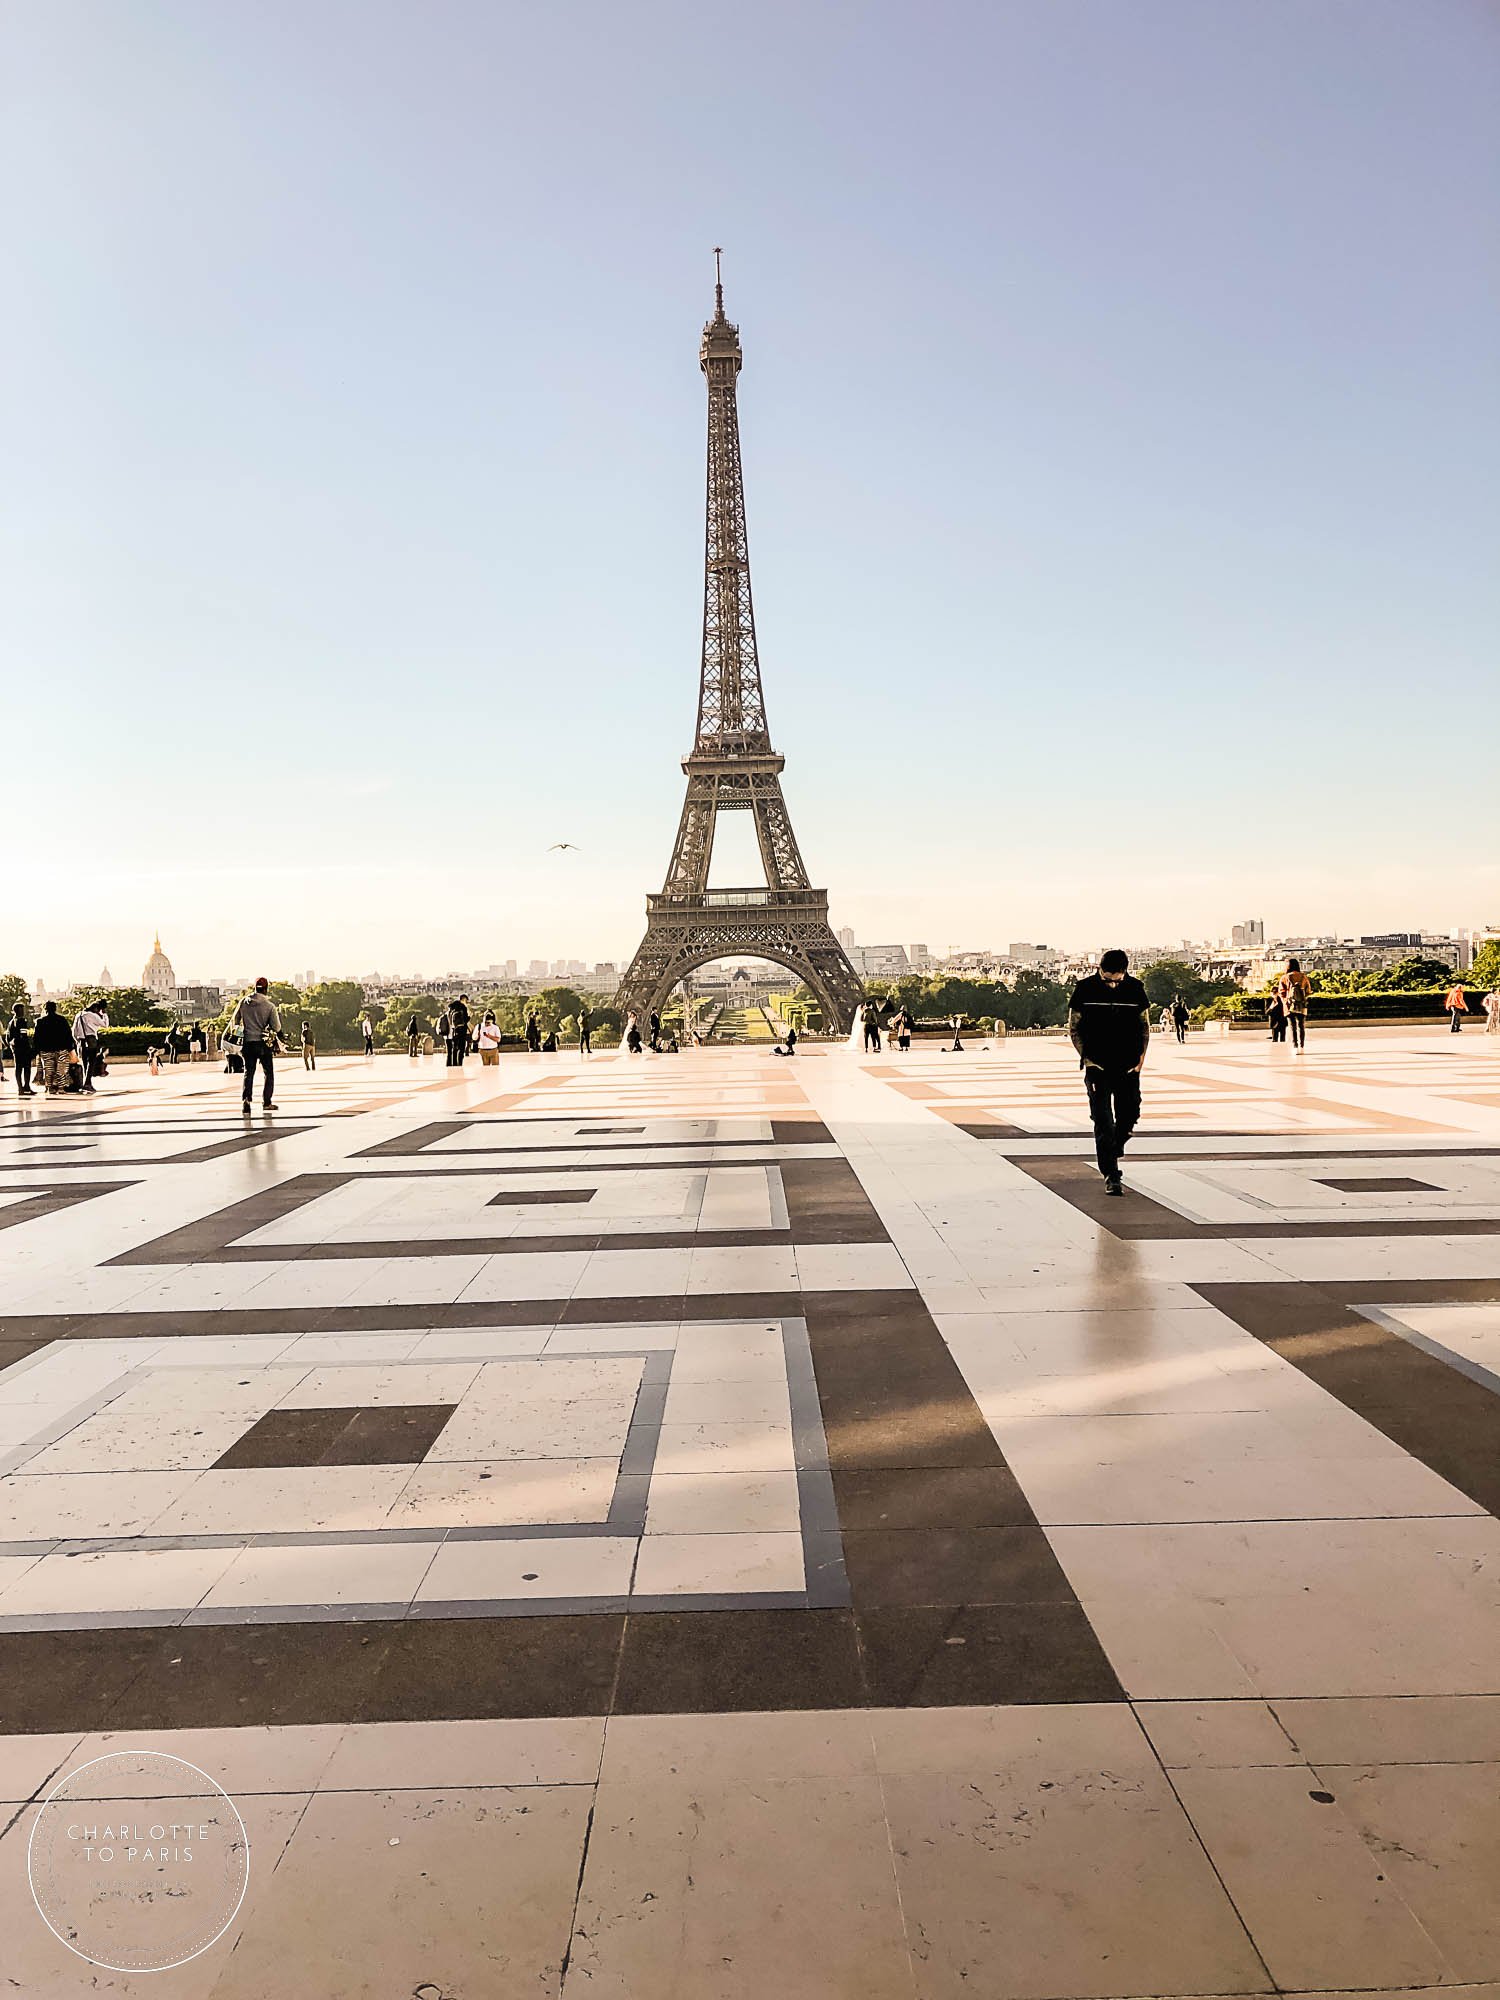 Eiffel Tower: where to see the monument apart from in Paris?